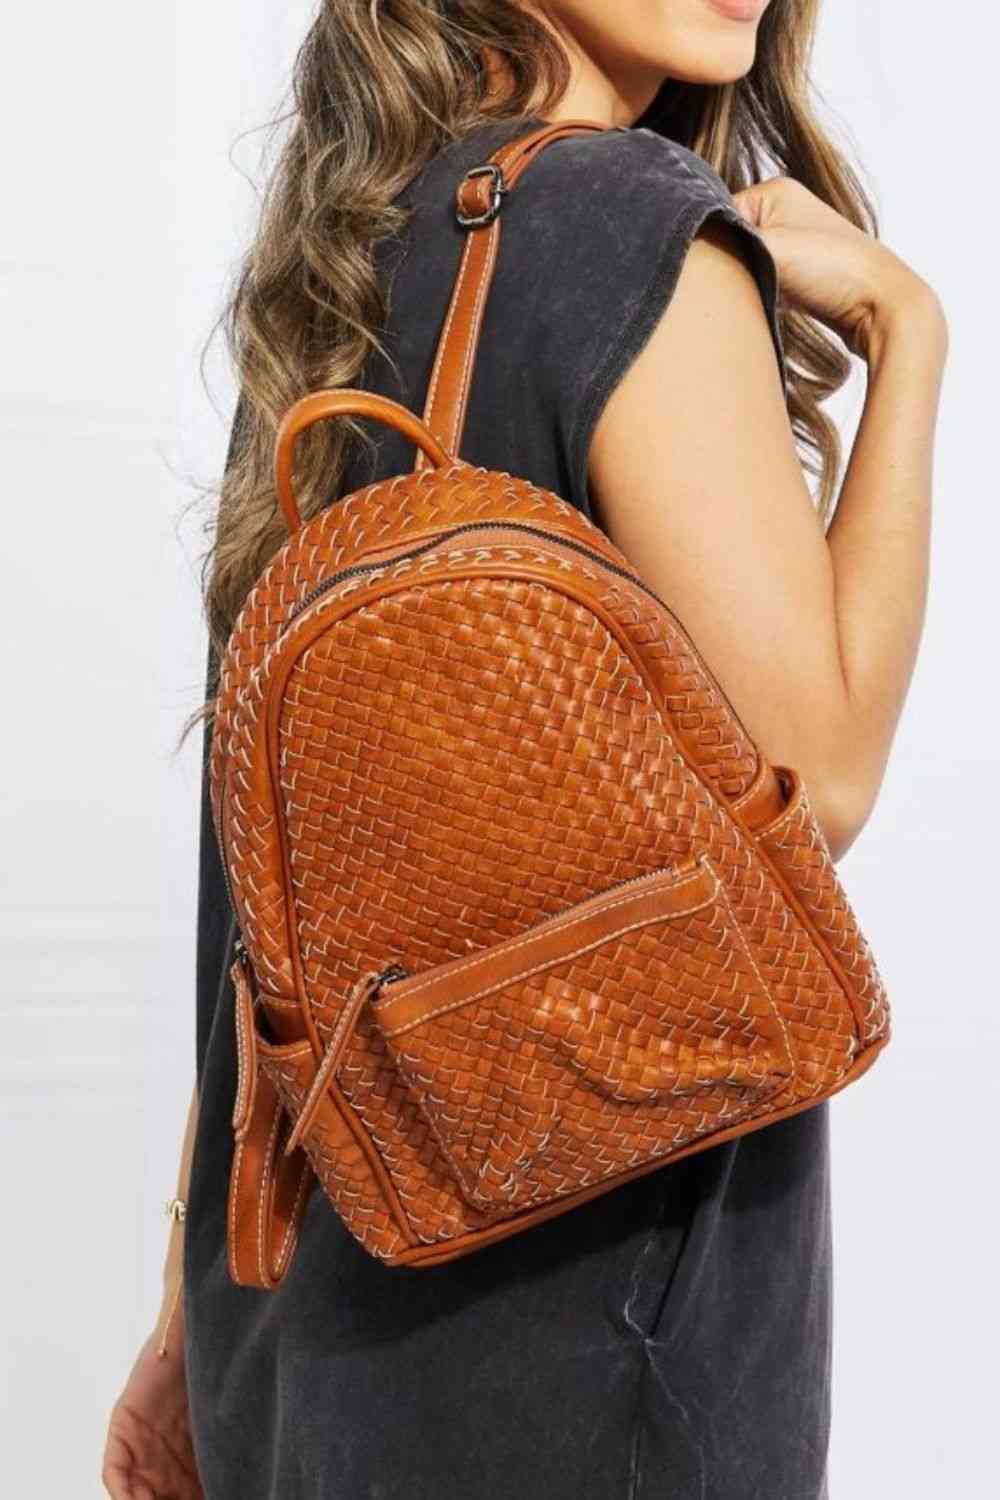 SHOMICO Certainly Chic Faux Leather Woven Backpack - Pahabu